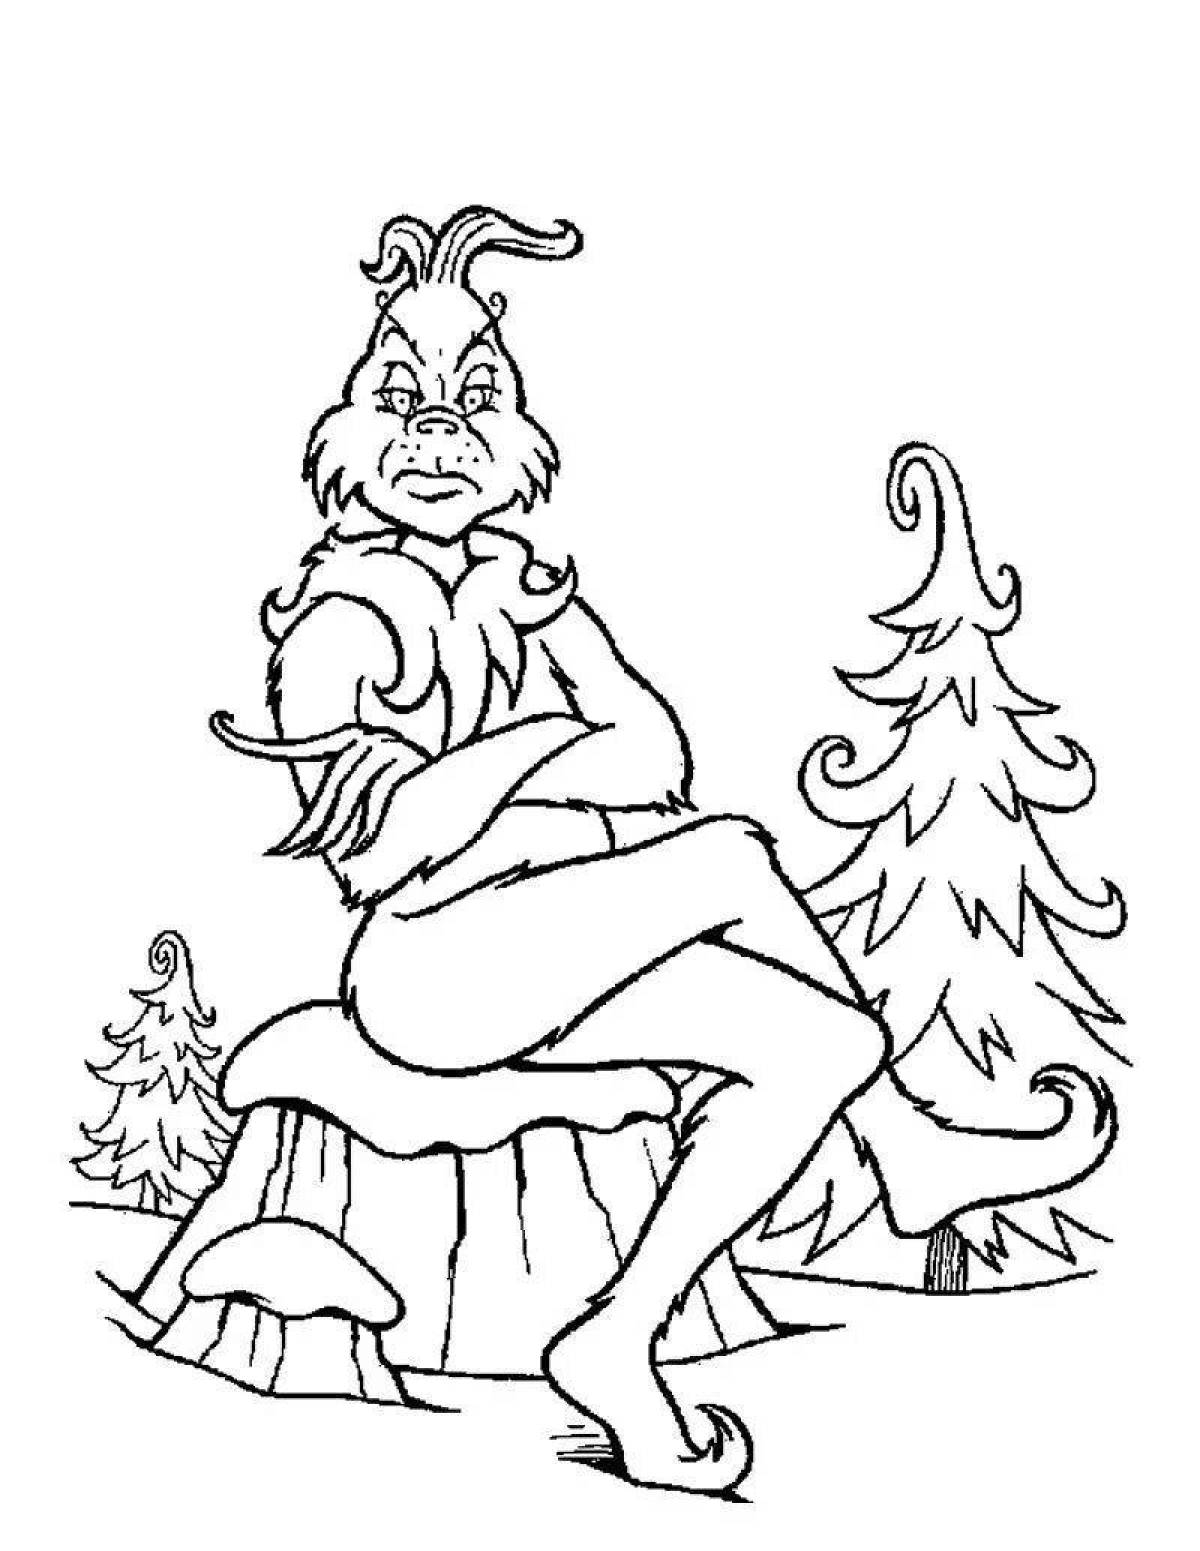 Glowing Grinch Stole Christmas coloring page